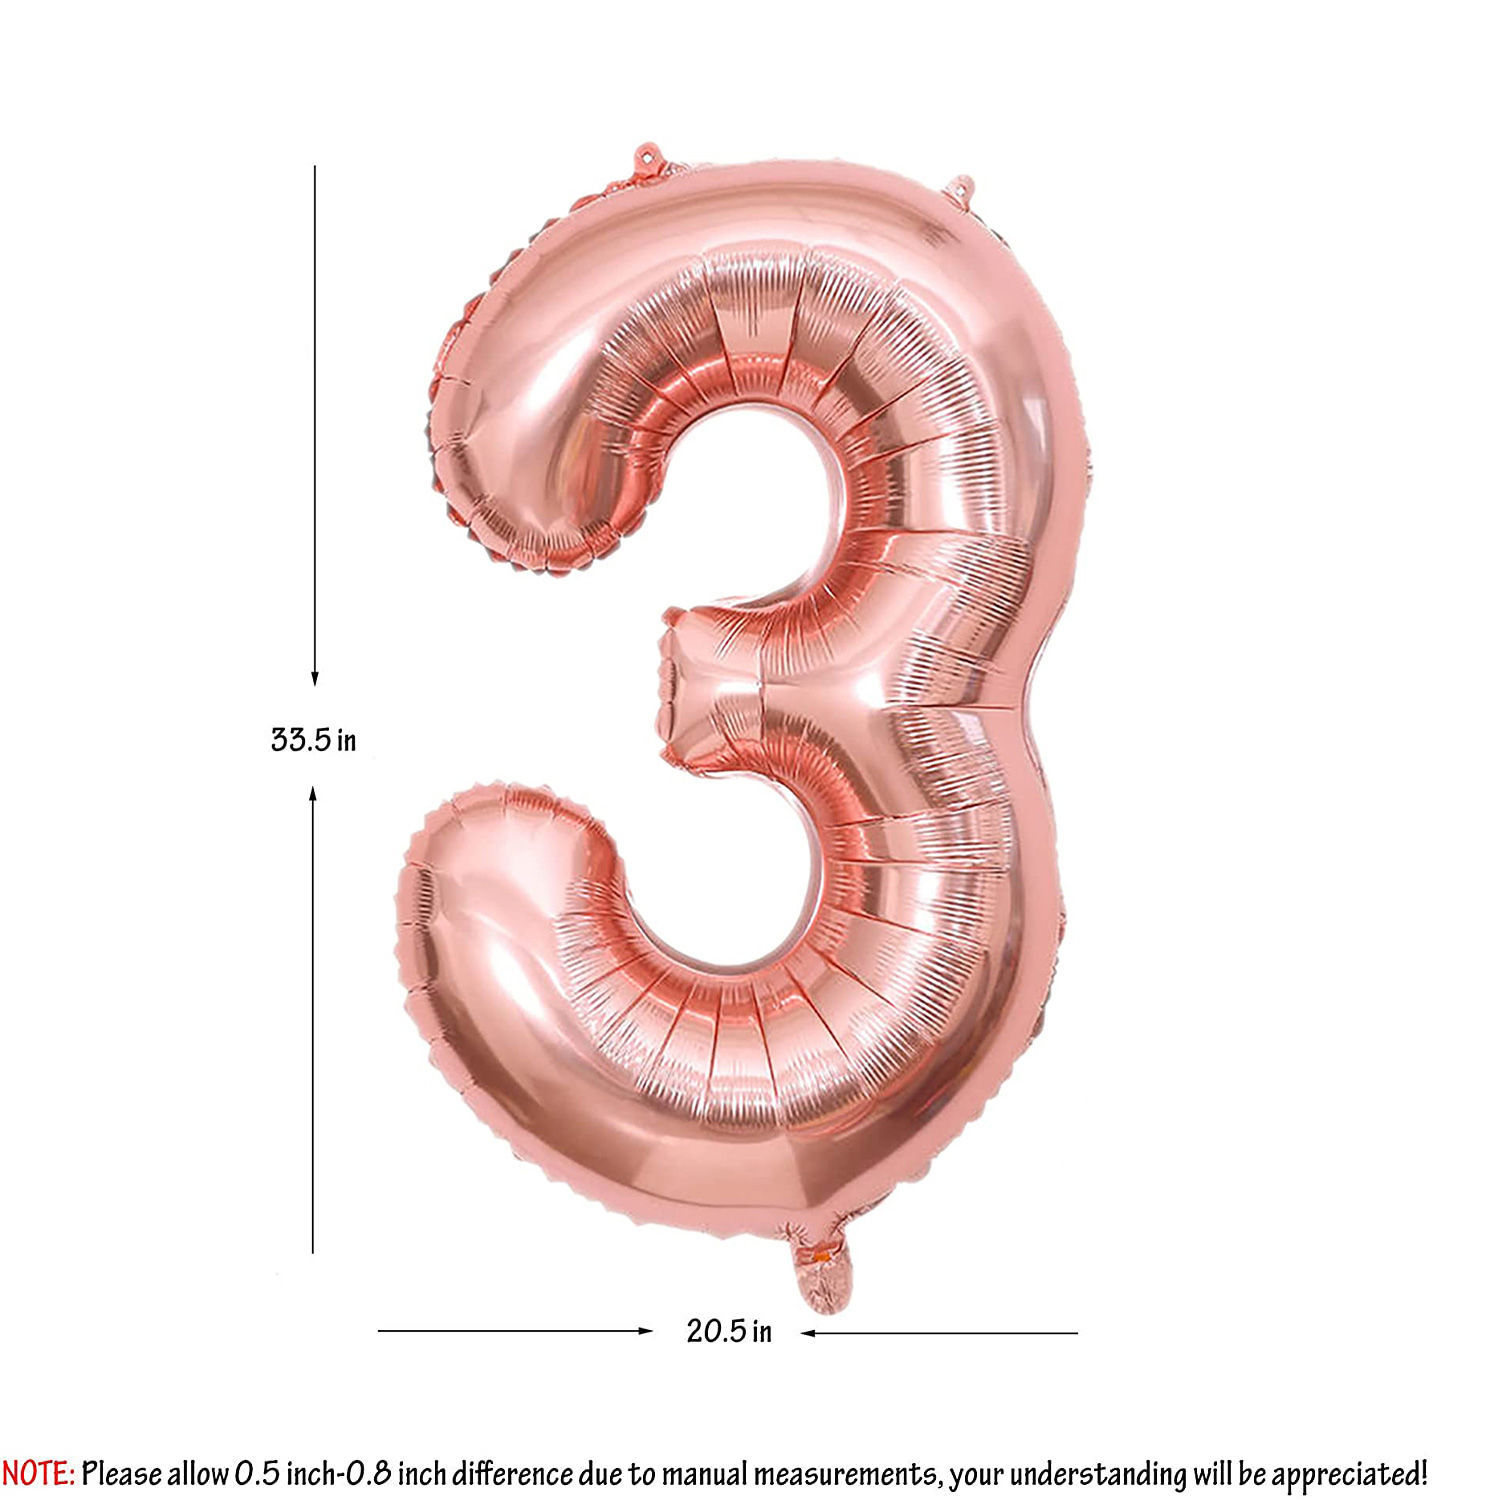 Picture of 34'' Foil Balloon Number 3 - Rose Gold (helium-filled)